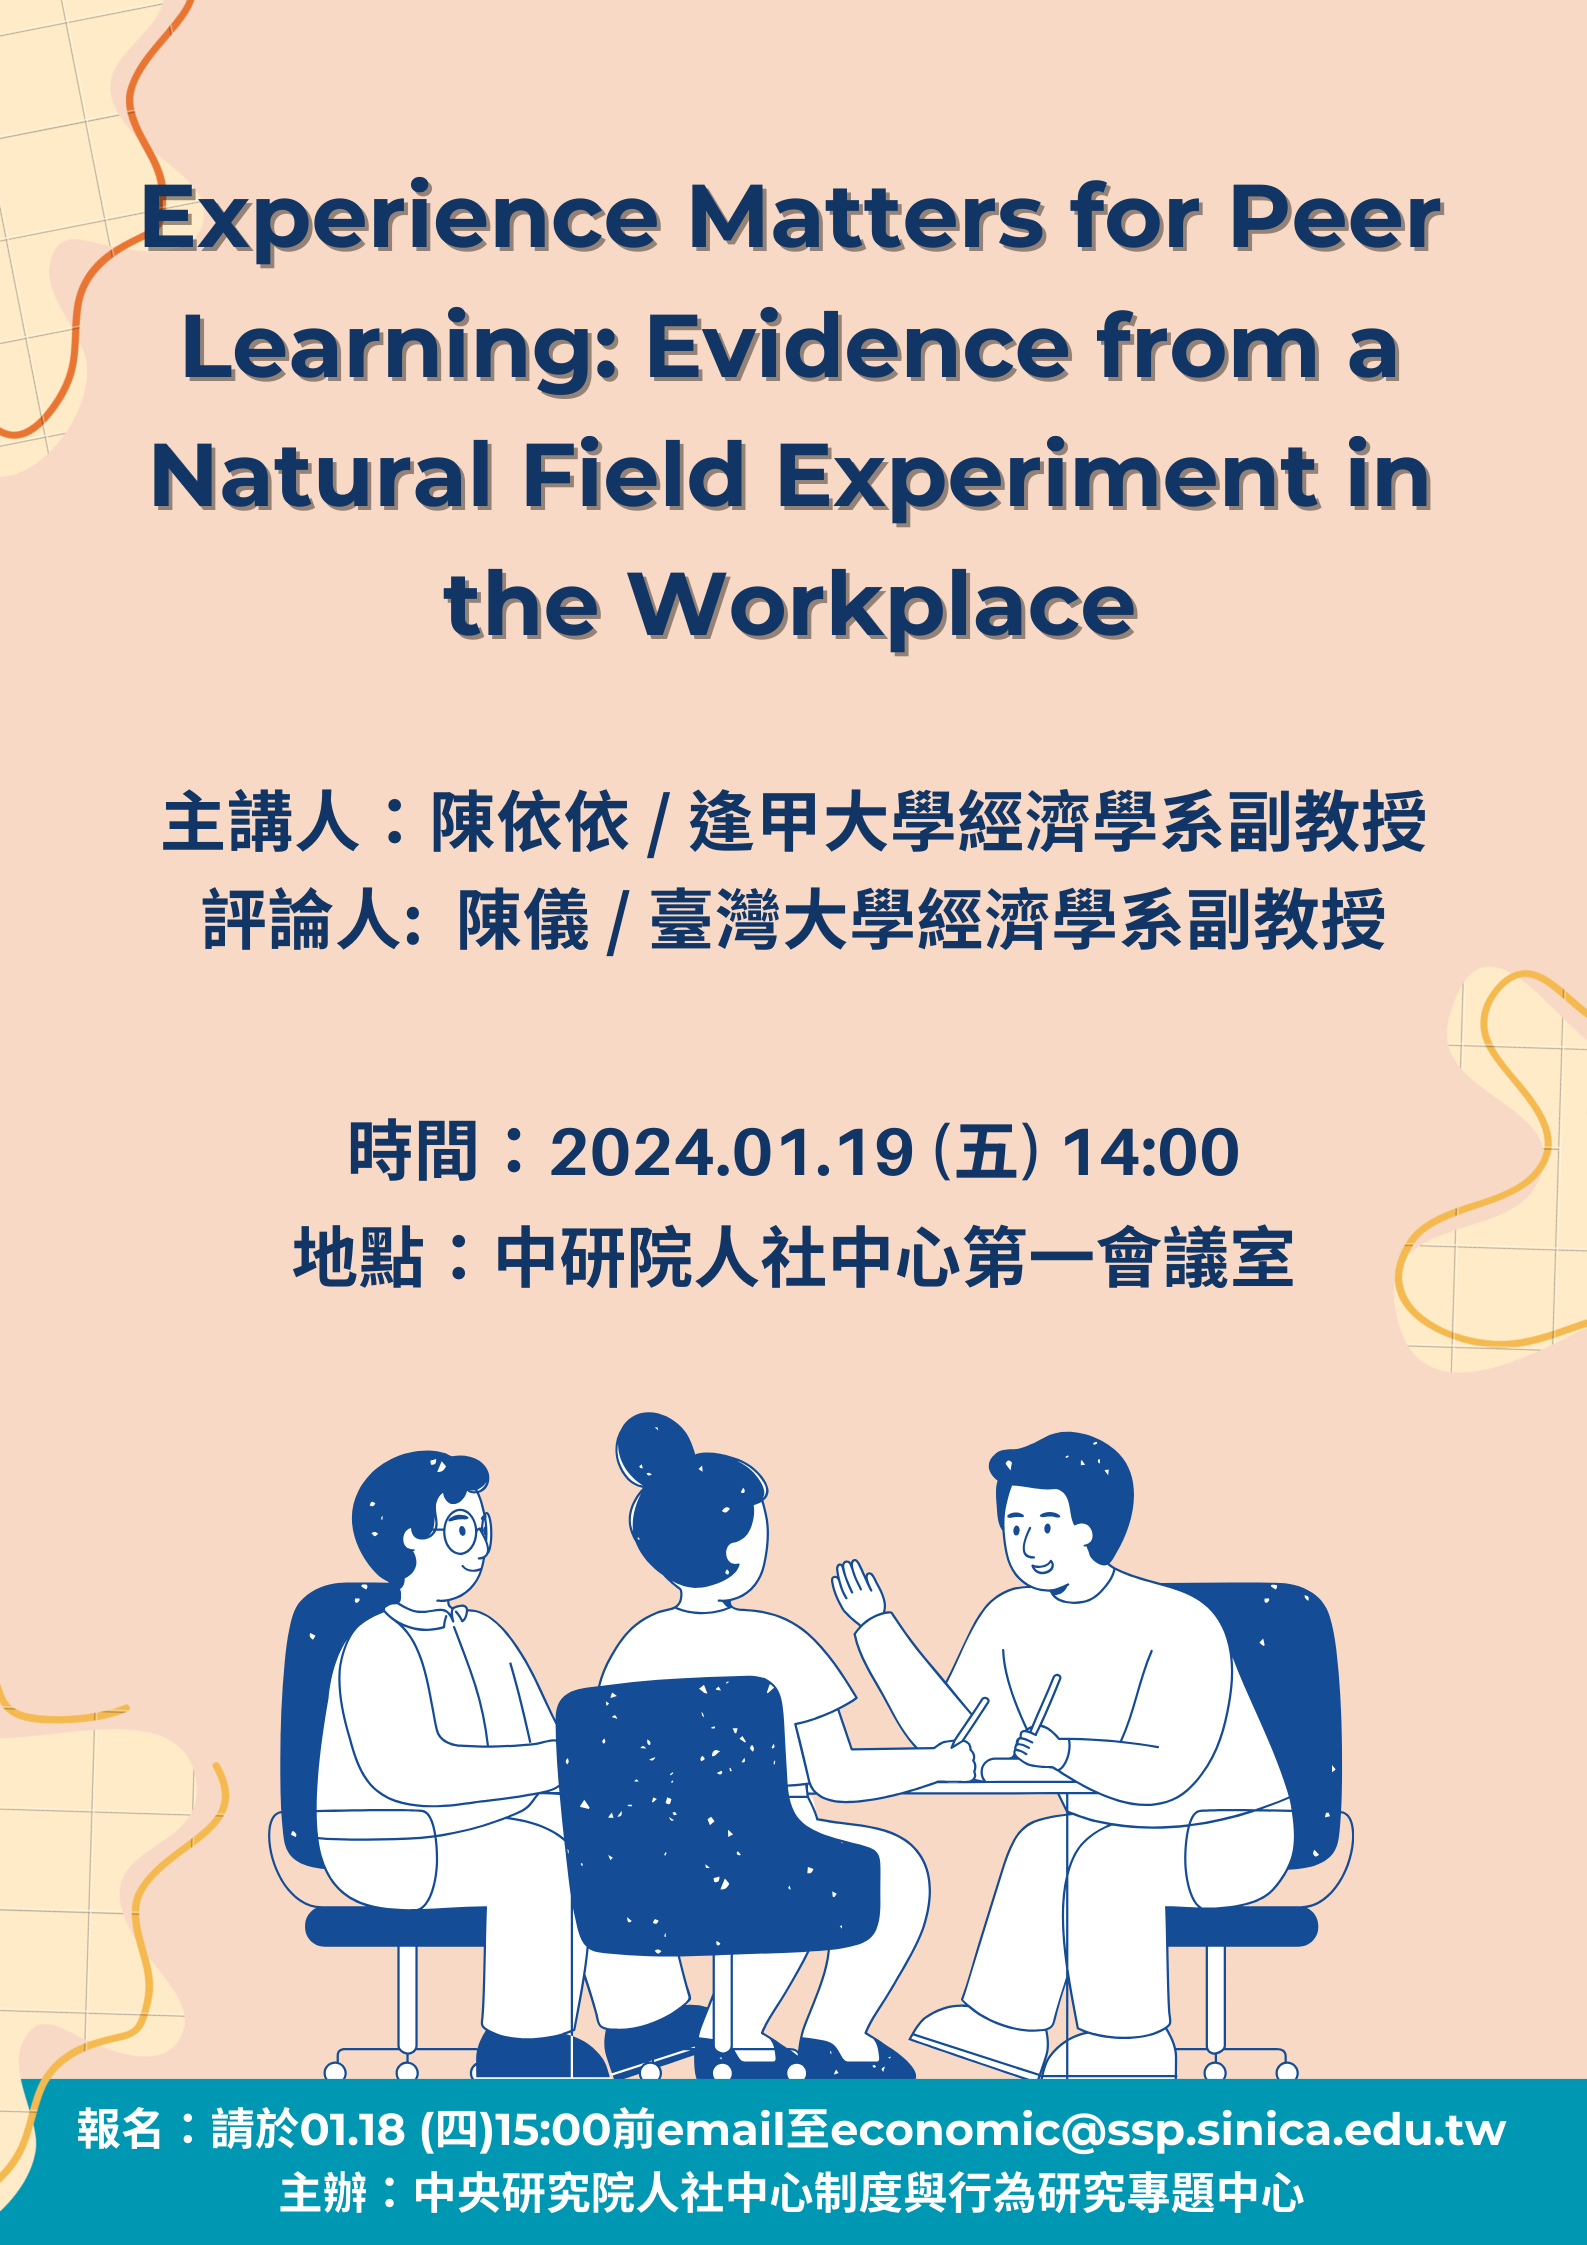 Experience Matters for Peer Learning: Evidence from a Natural Field Experiment in the Workplace